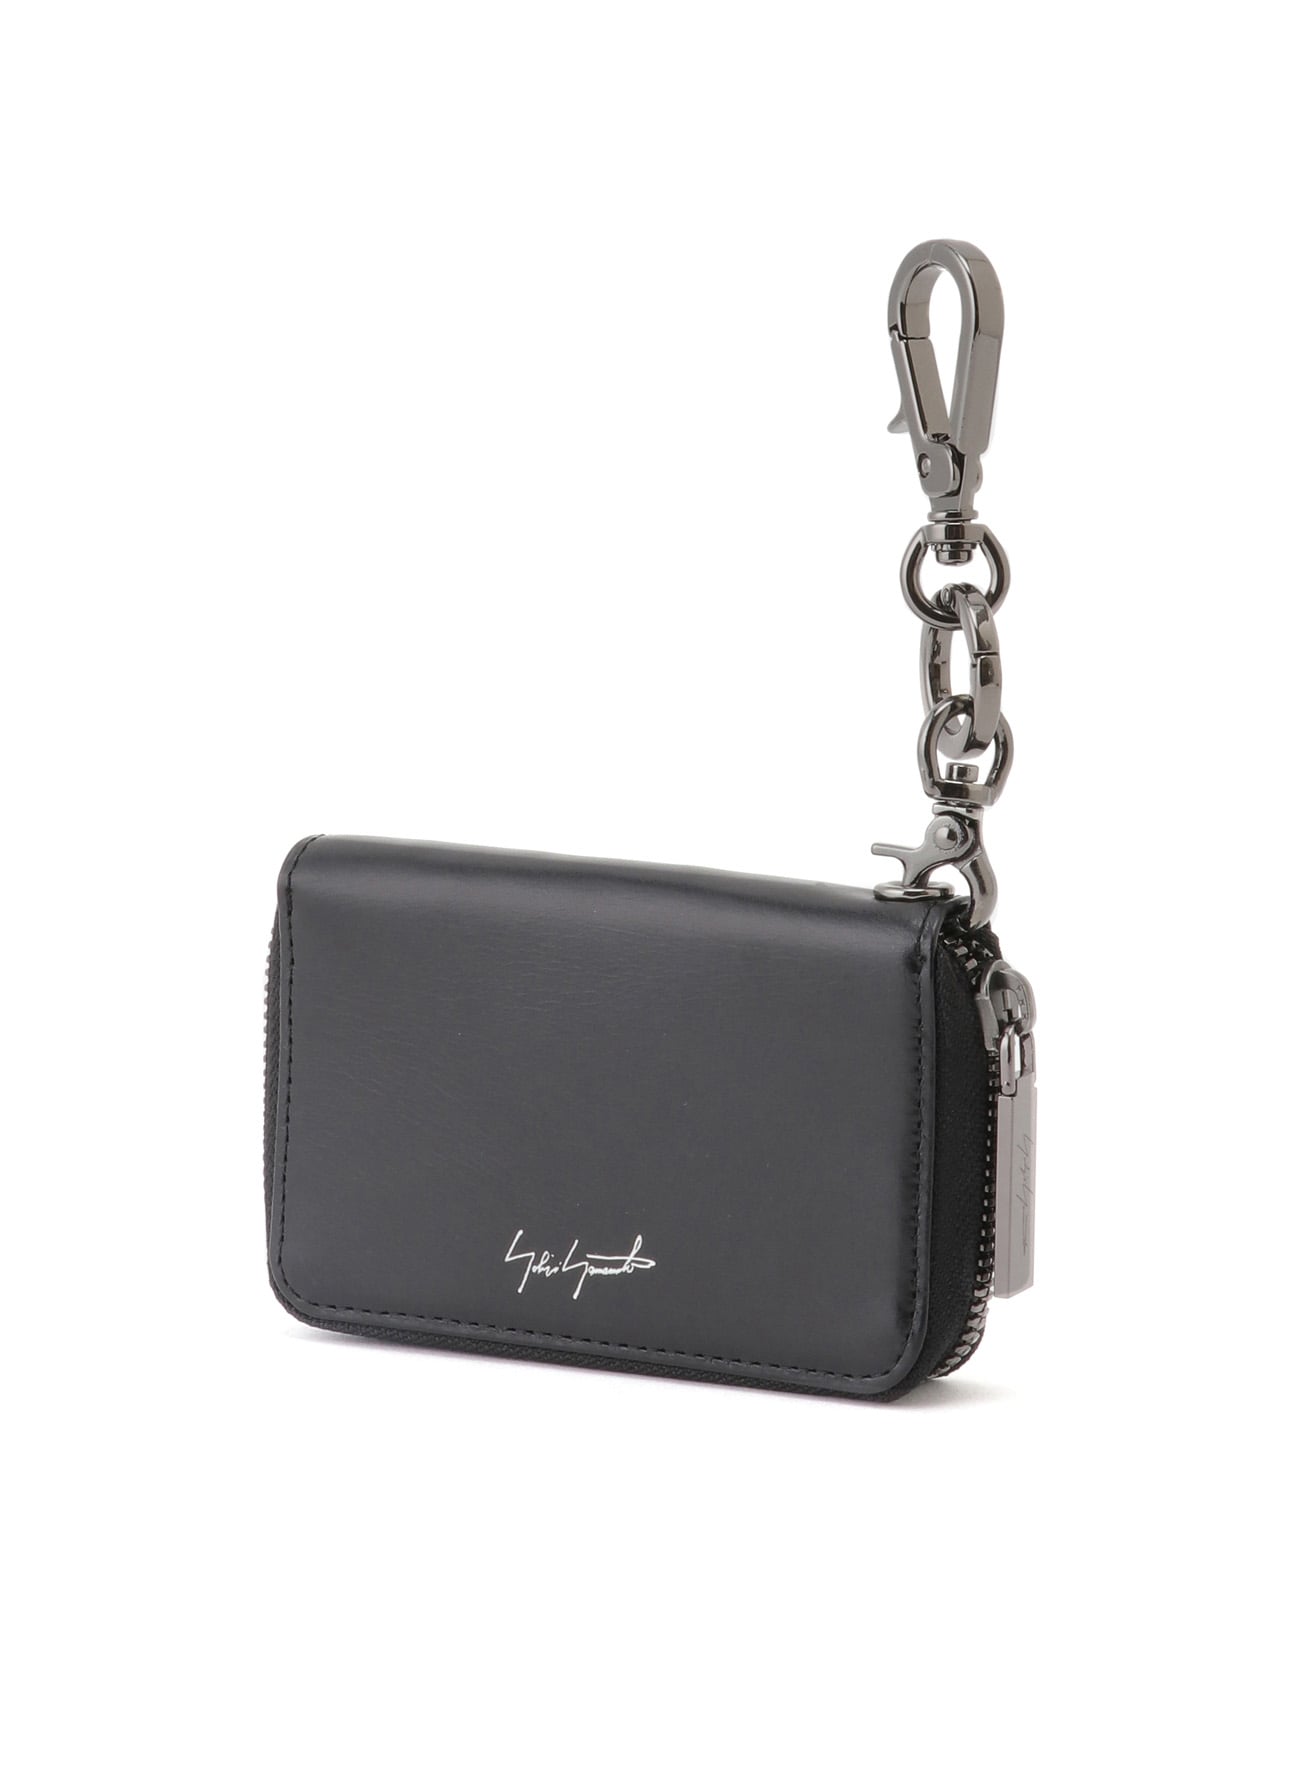 Mens Small Leather Key Case, Fashion Leather Key Pouch